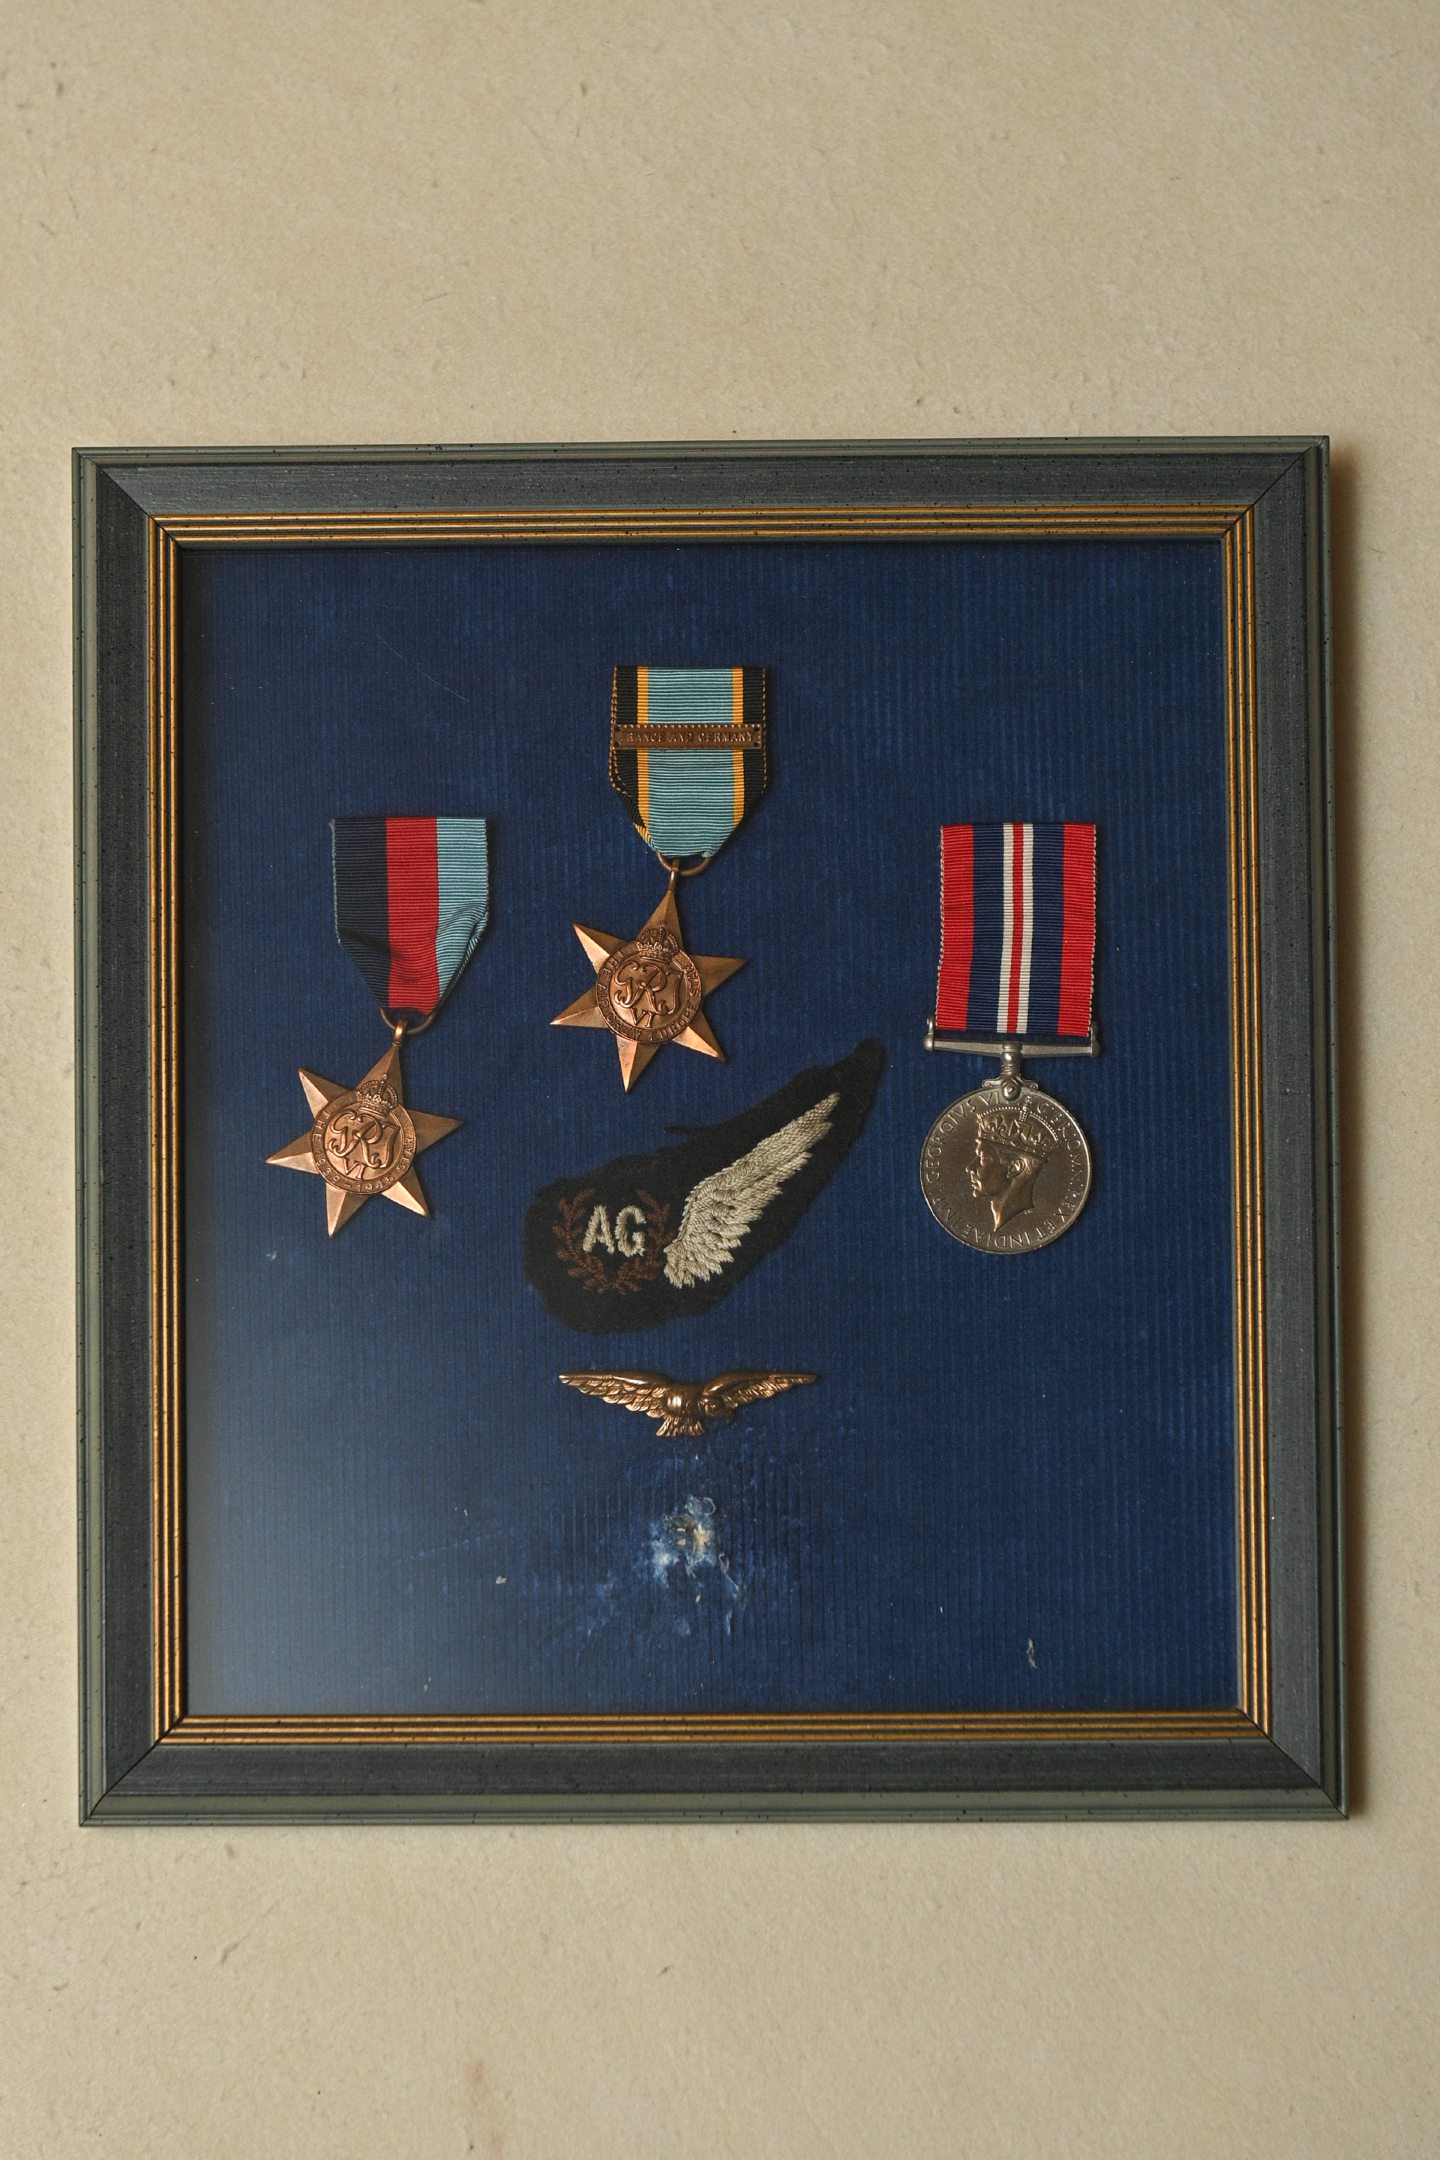 Bill's wings and medals, apart from the George Medal, which had been given to family.